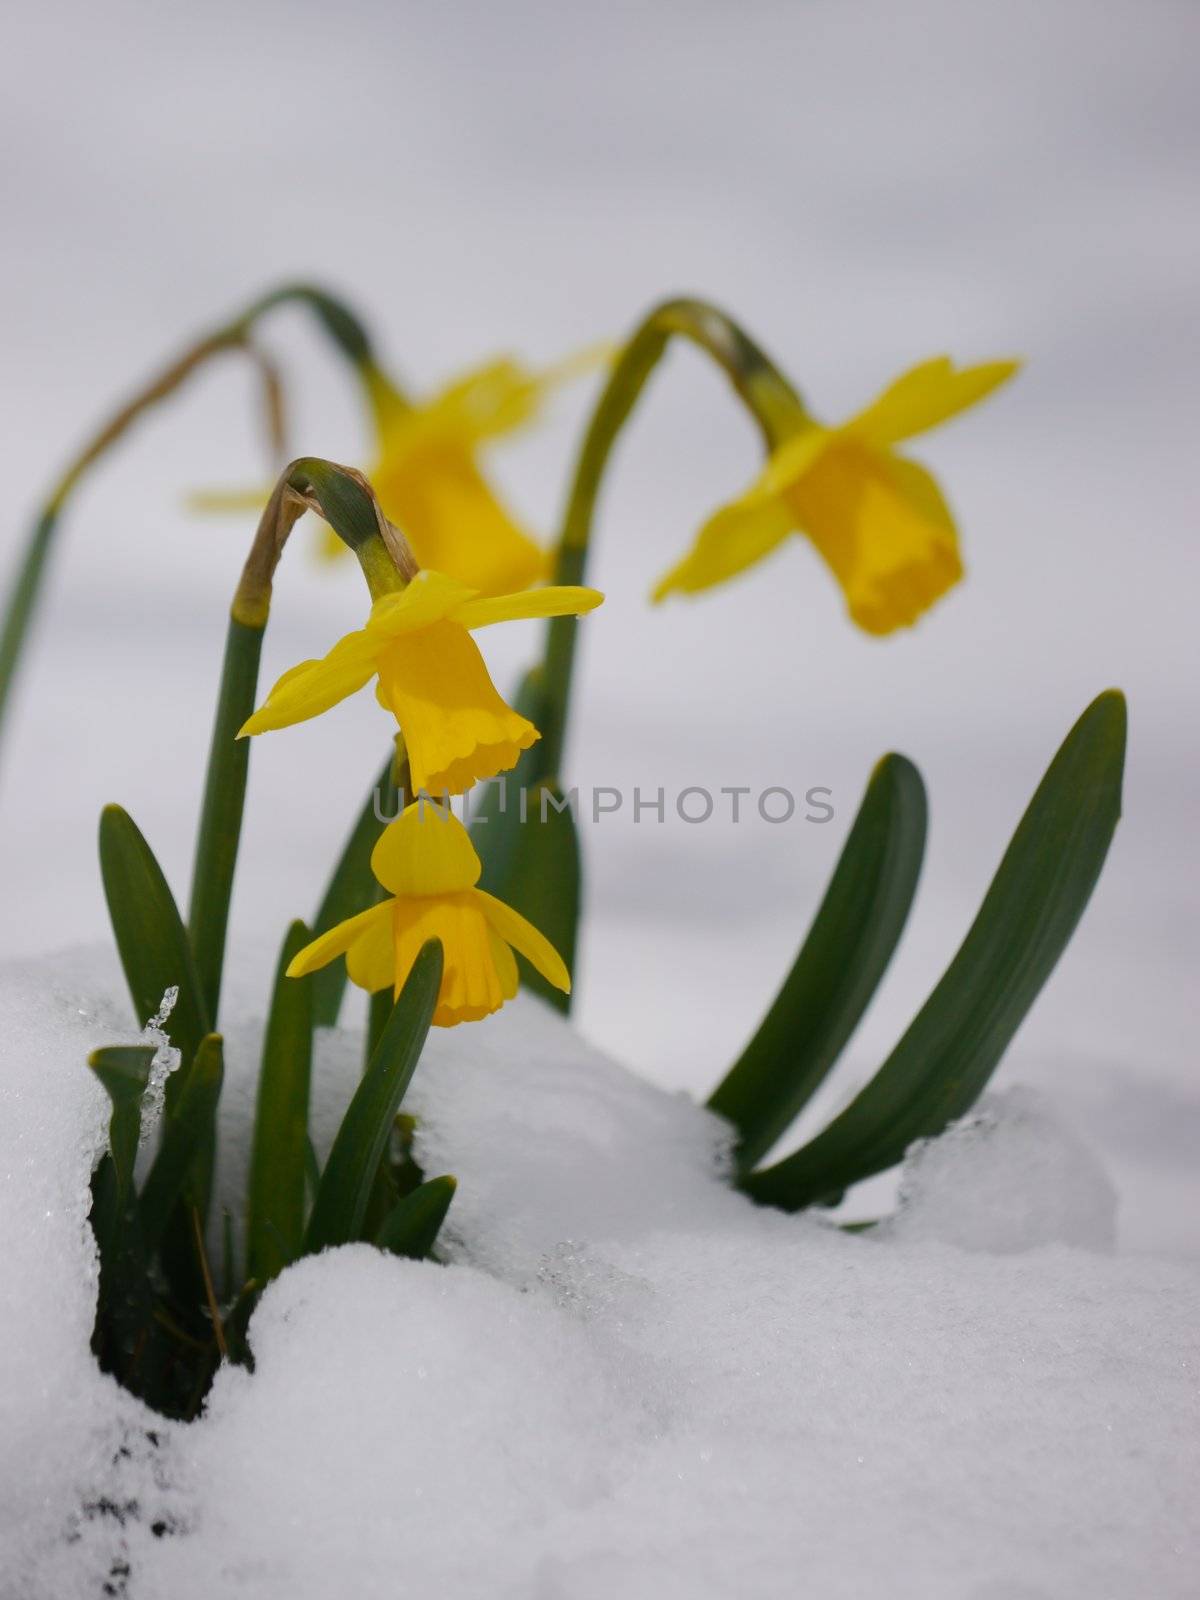 Outdoor shot of yellow daffodils